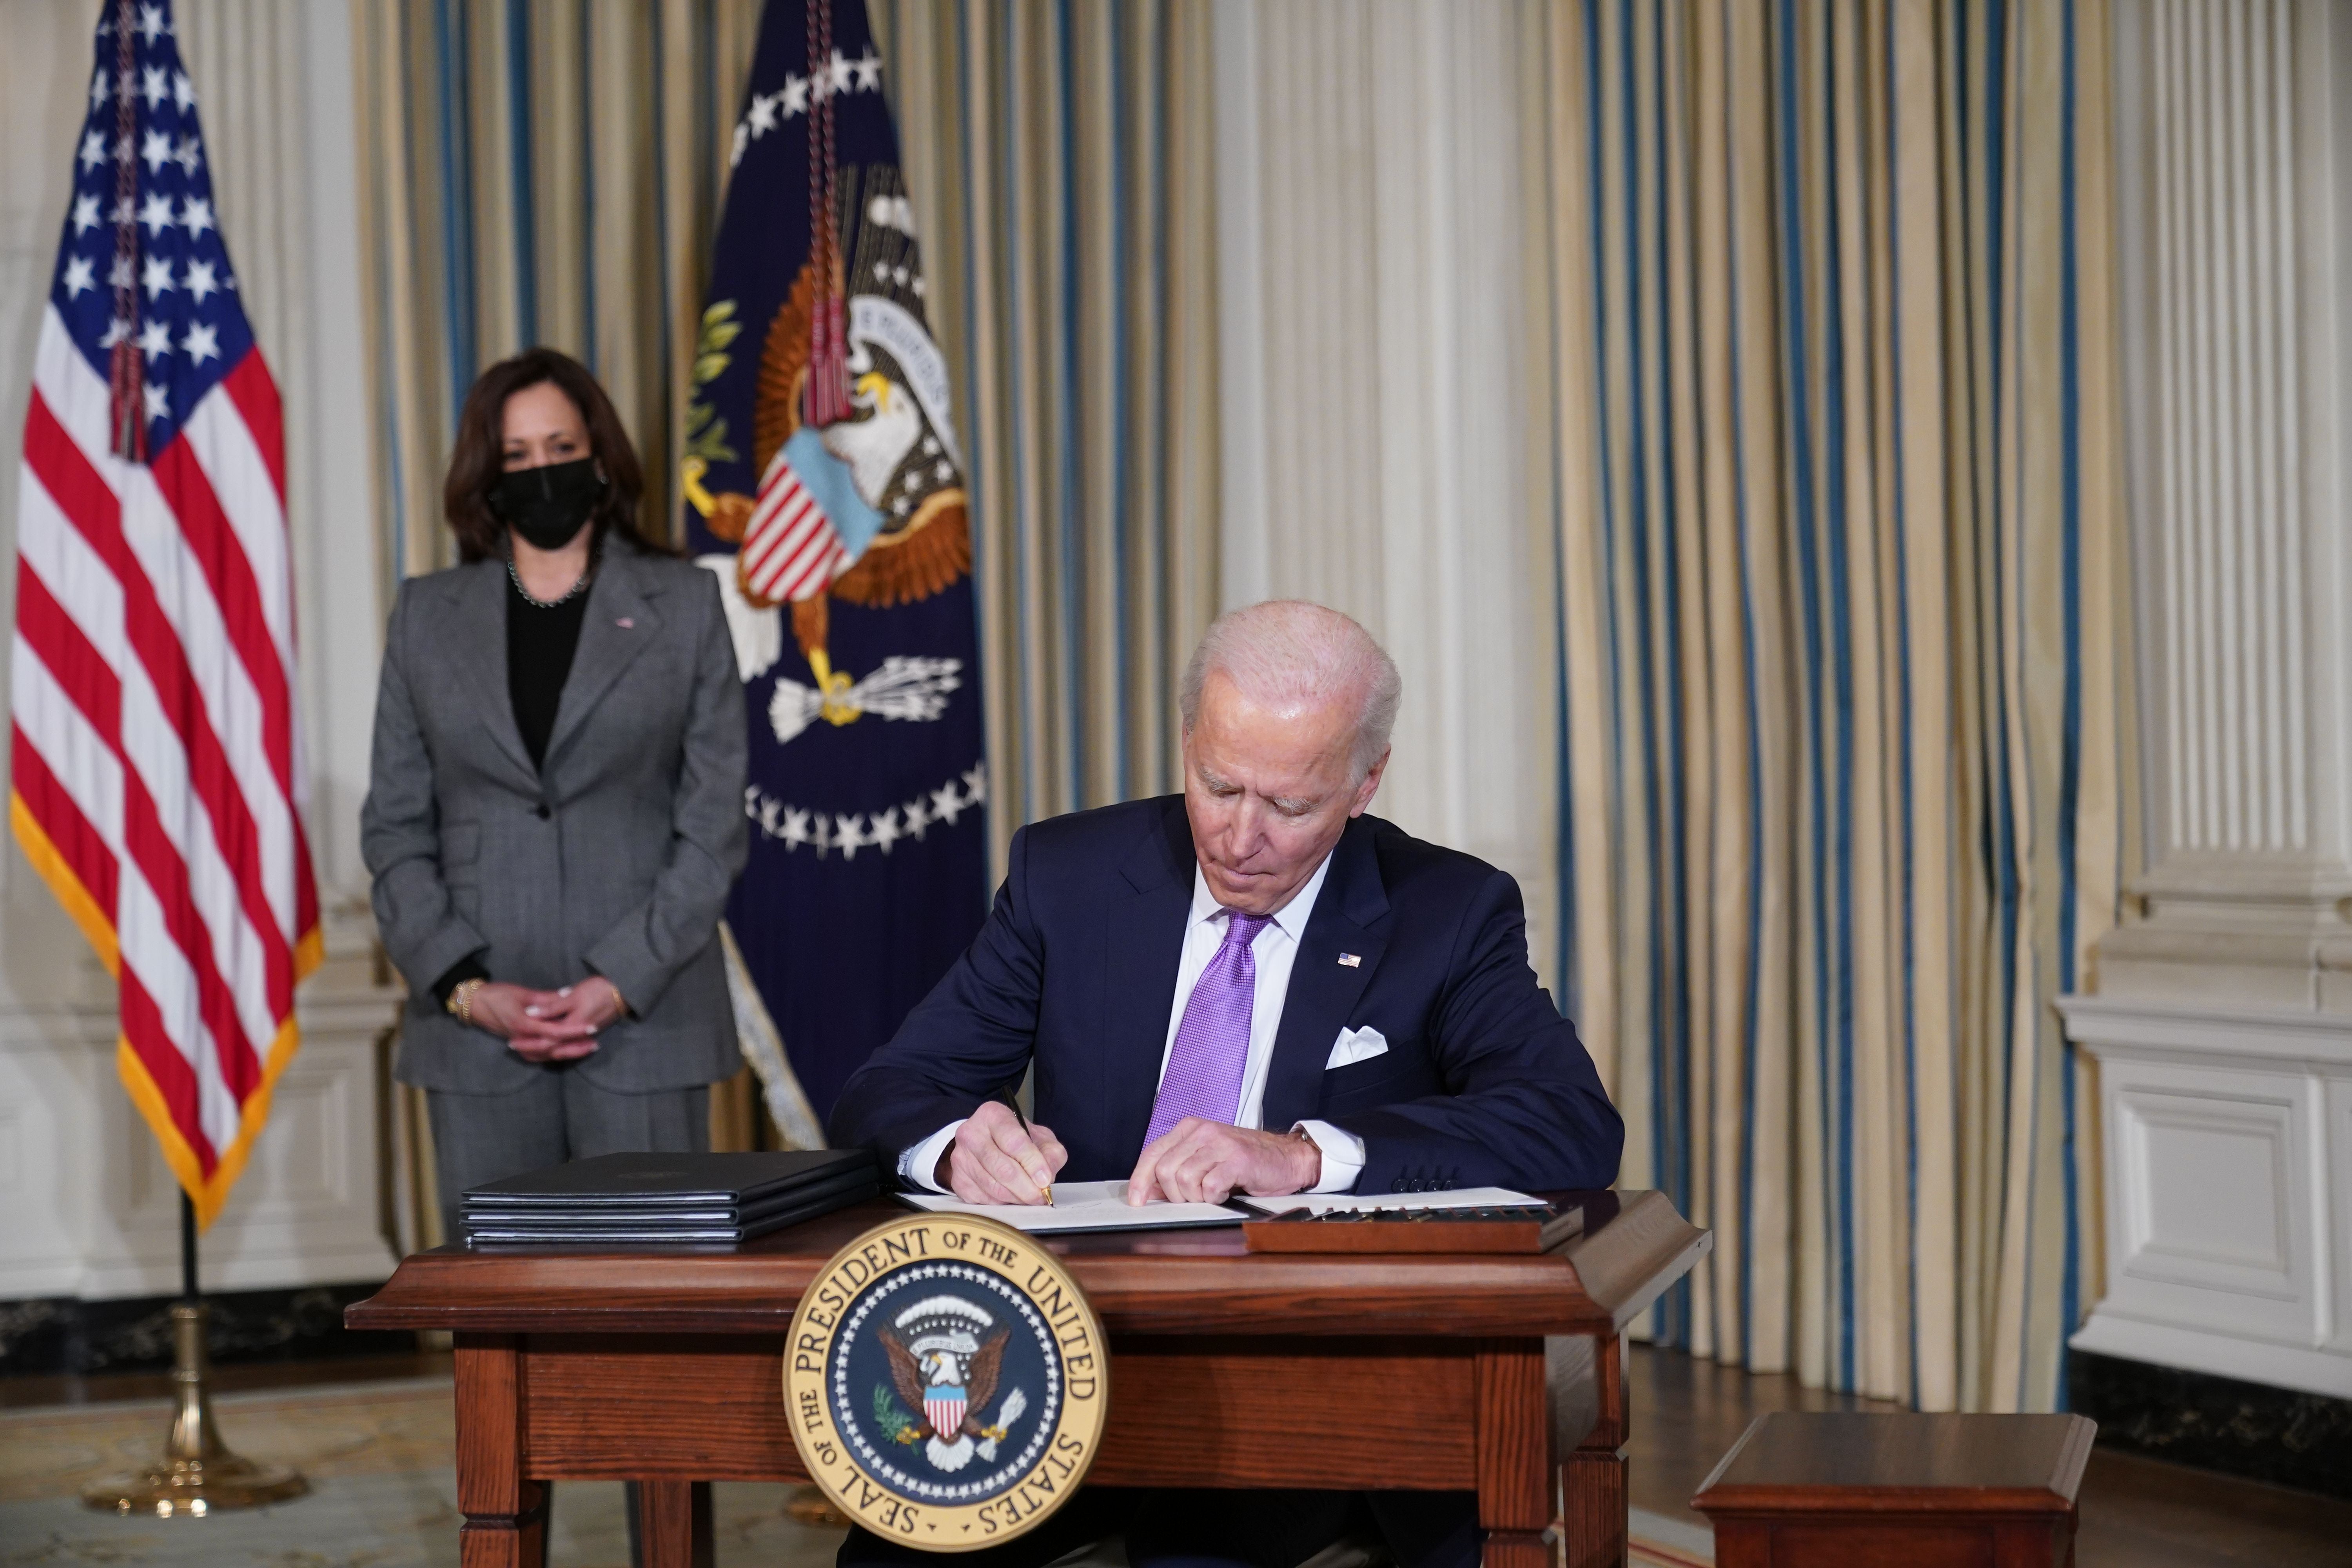 Biden cites George Floyd murder as ‘turning point’ as he signs executive orders to tackle racial equity.